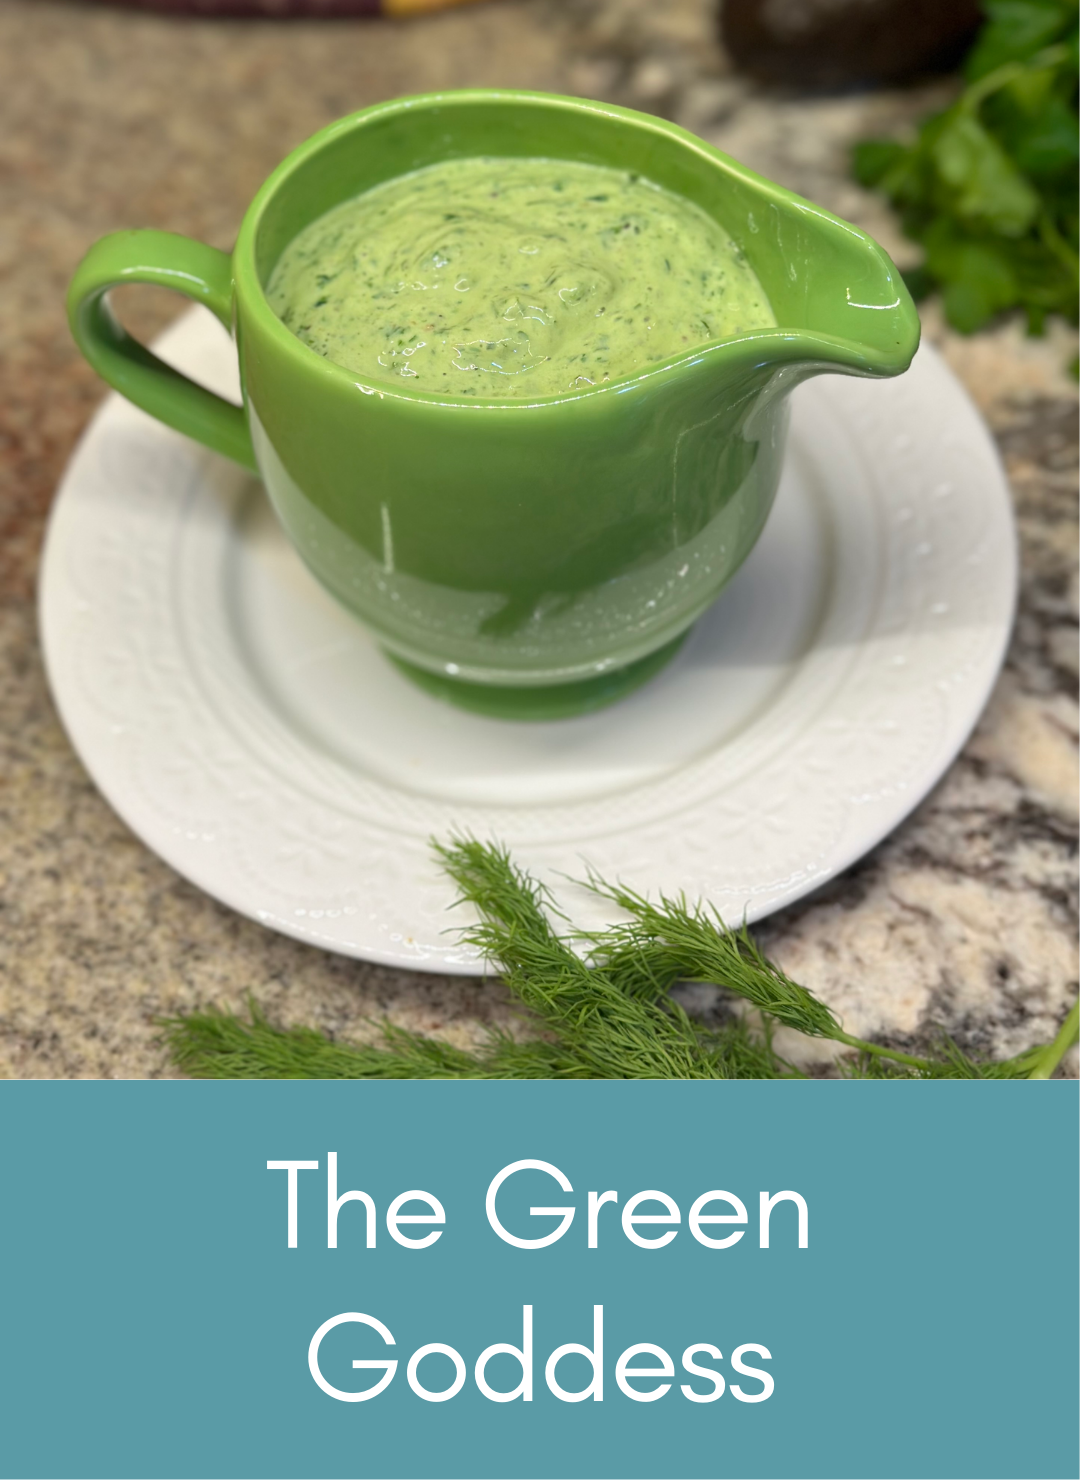 The green goddess whole food plant based dressing Picture with link to recipe